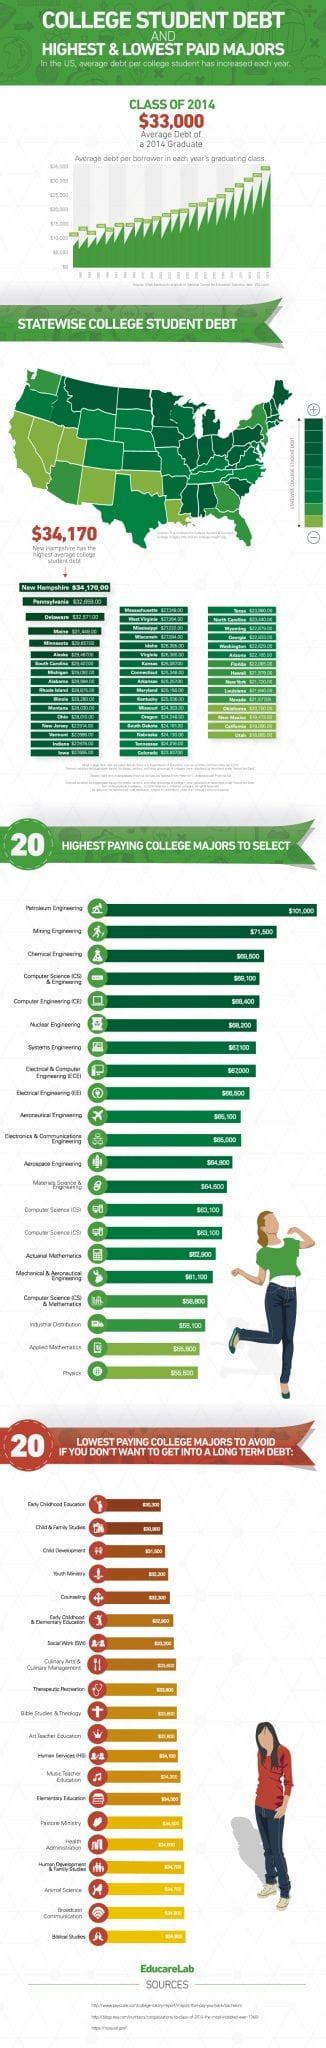 Infographic College Student Debt And Highest And Lowest Paid College Majors